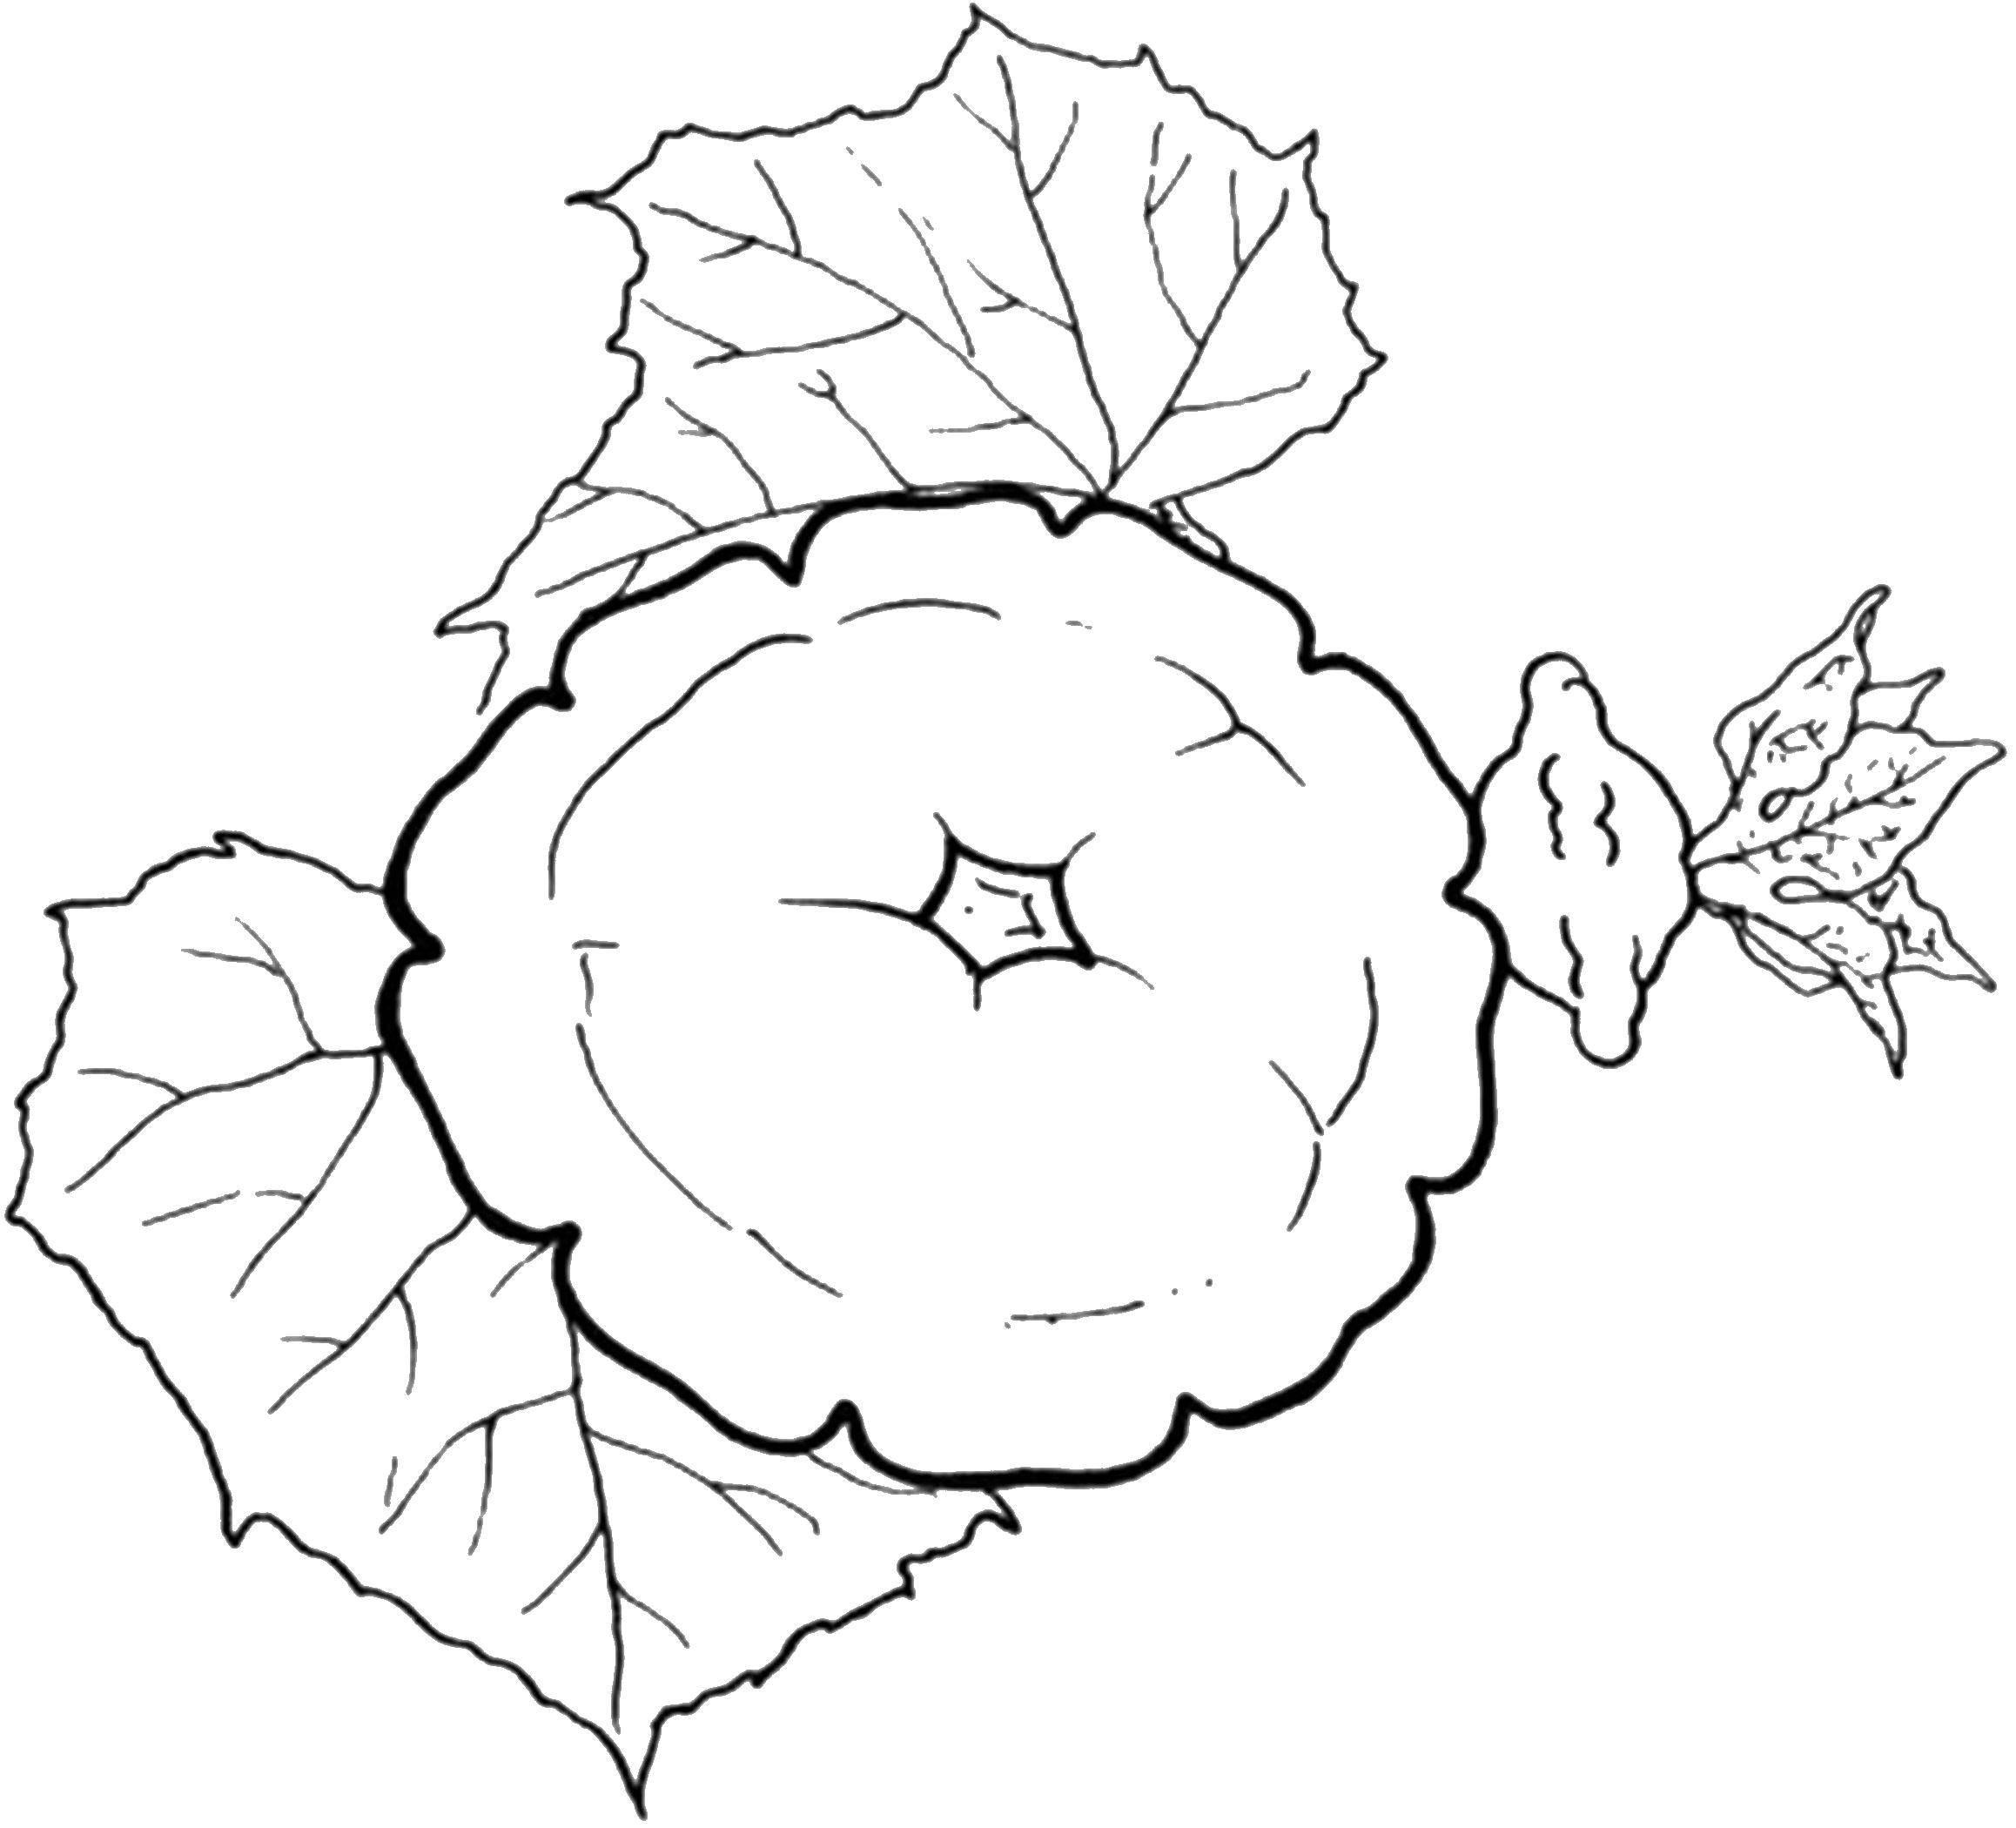 Coloring Patison. Category vegetables. Tags:  patison.